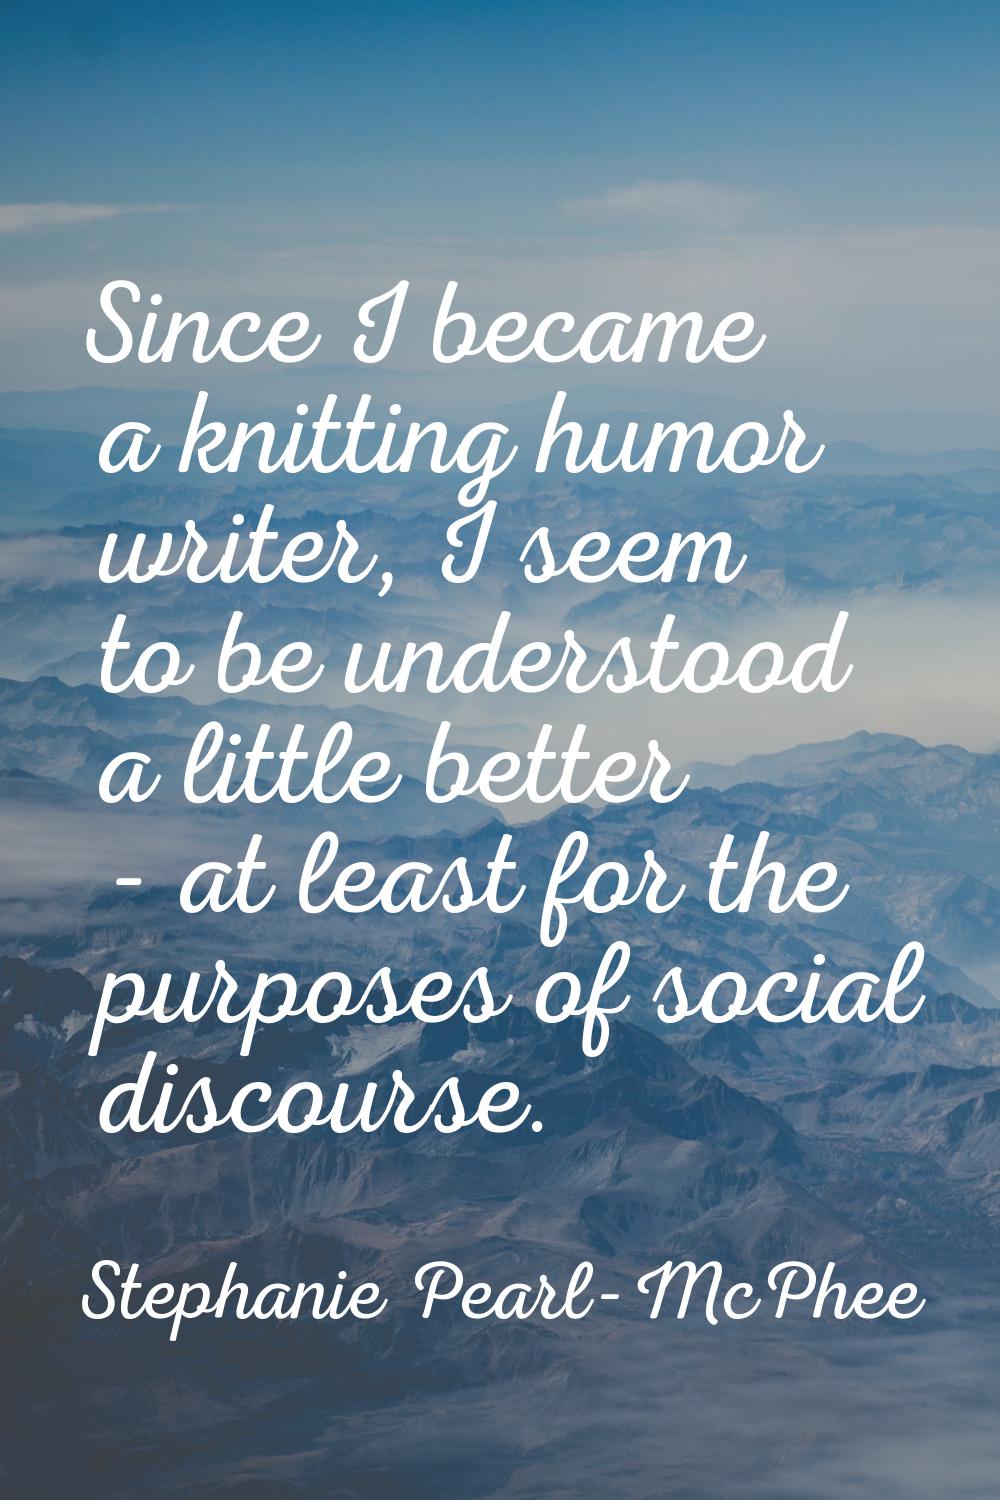 Since I became a knitting humor writer, I seem to be understood a little better - at least for the 